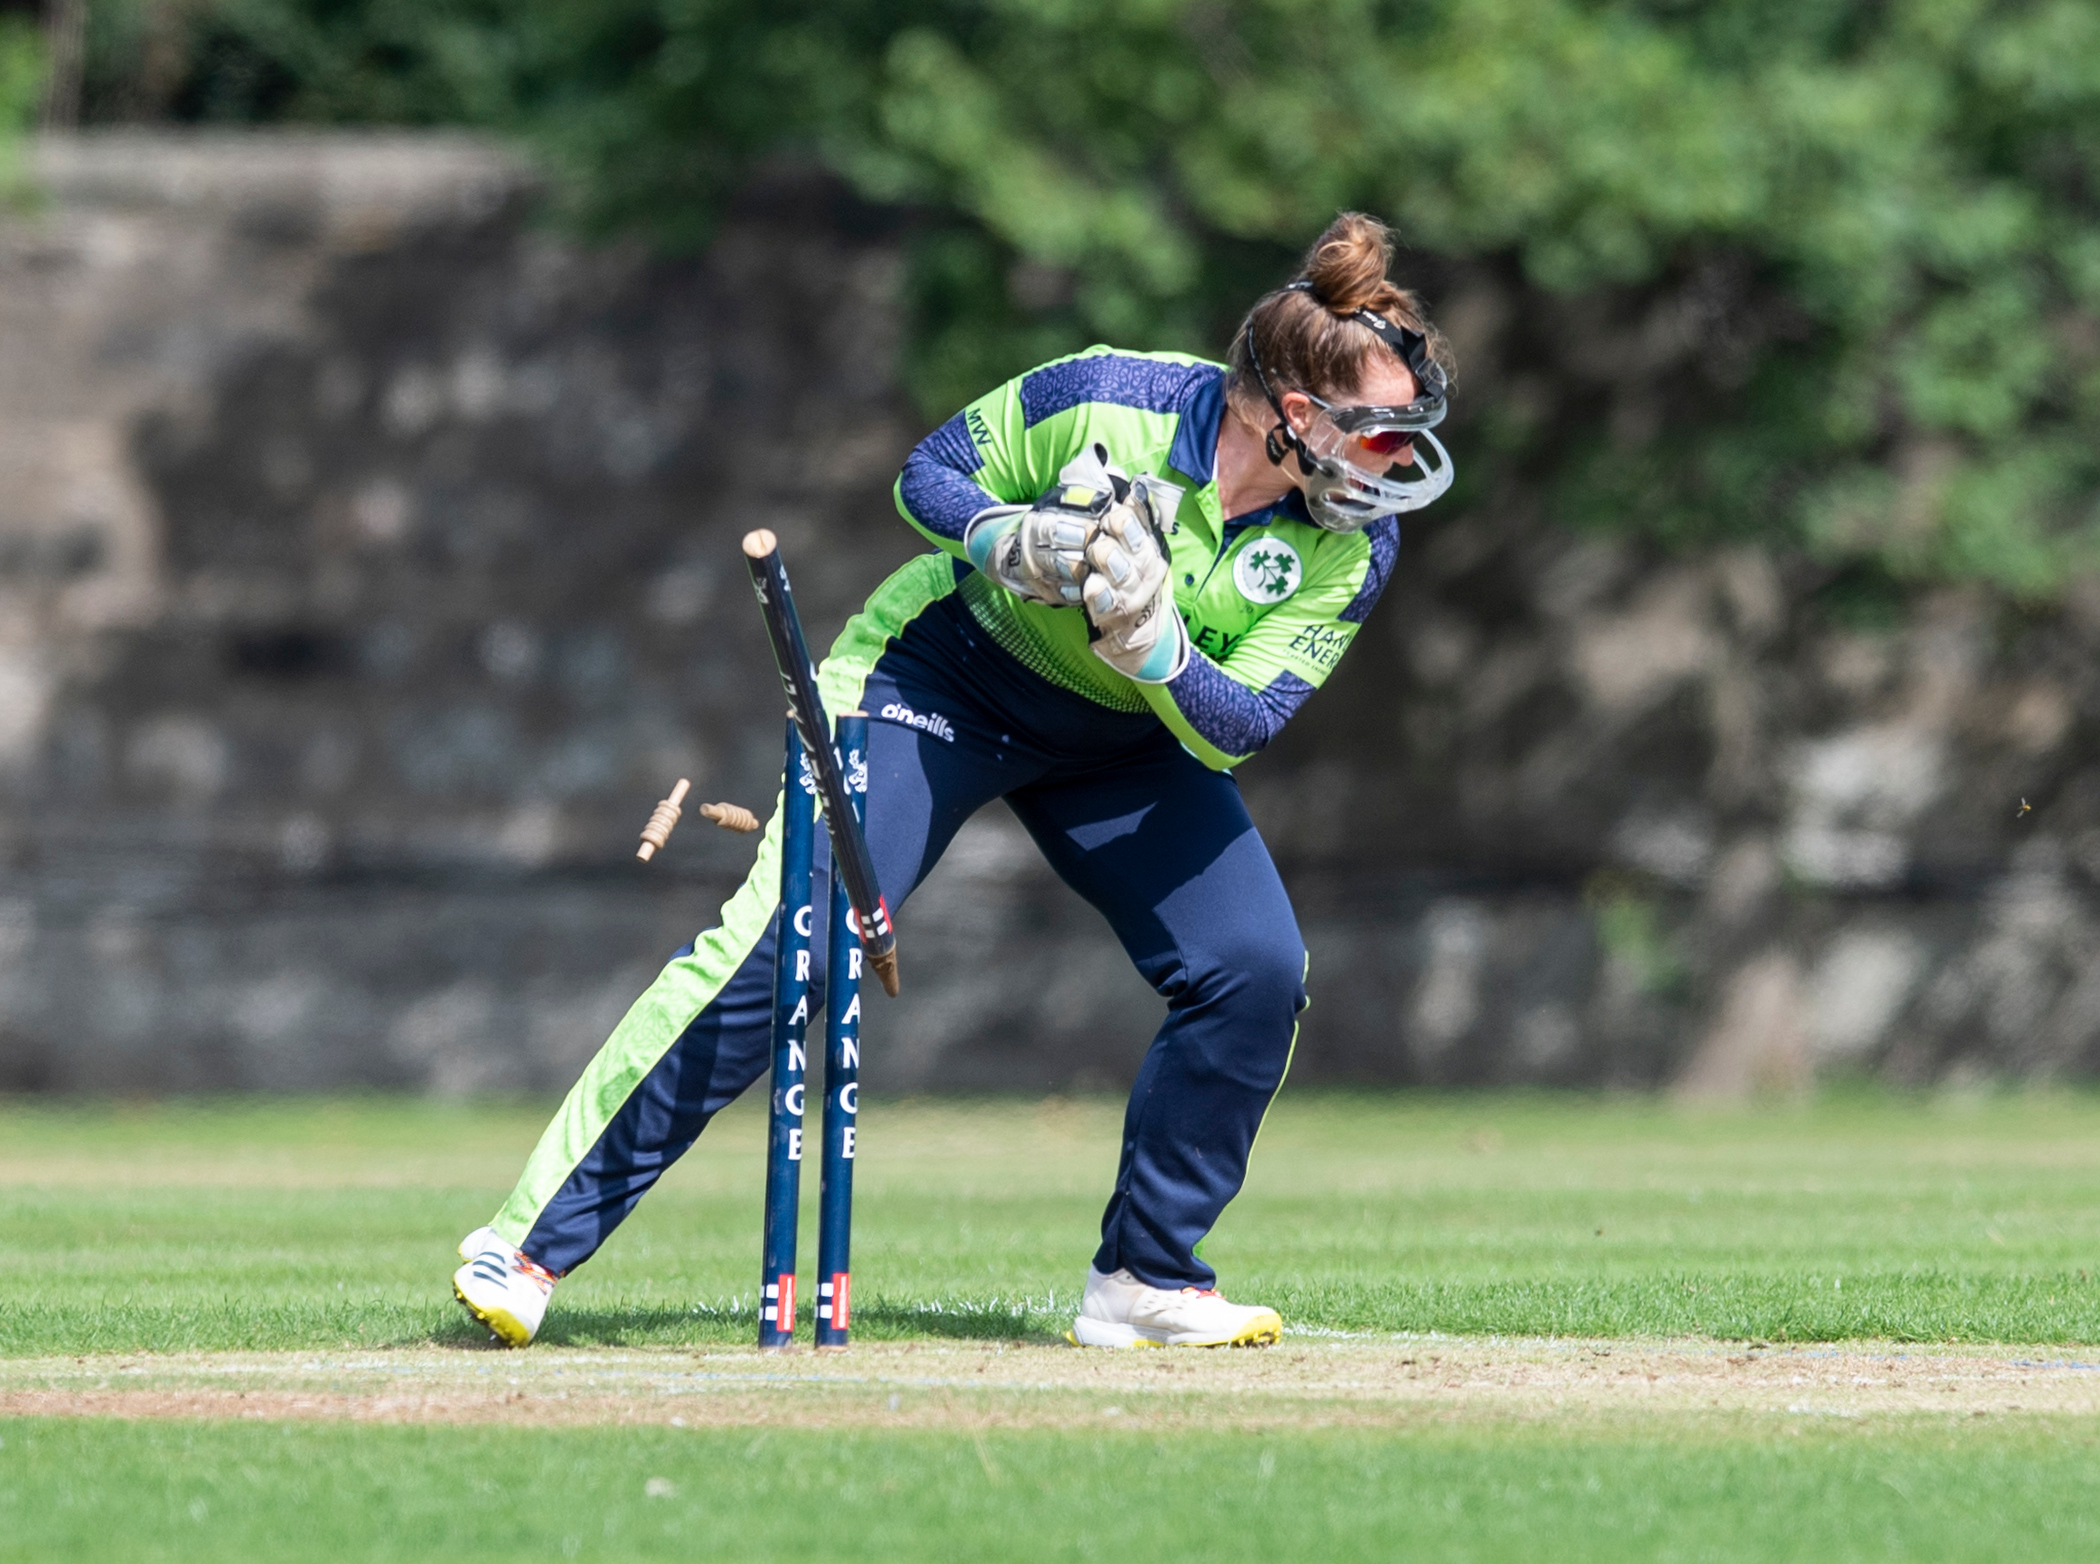 Cricket Ireland: Interview with Mary Waldron - “I’ve never wanted to go on a tour more”